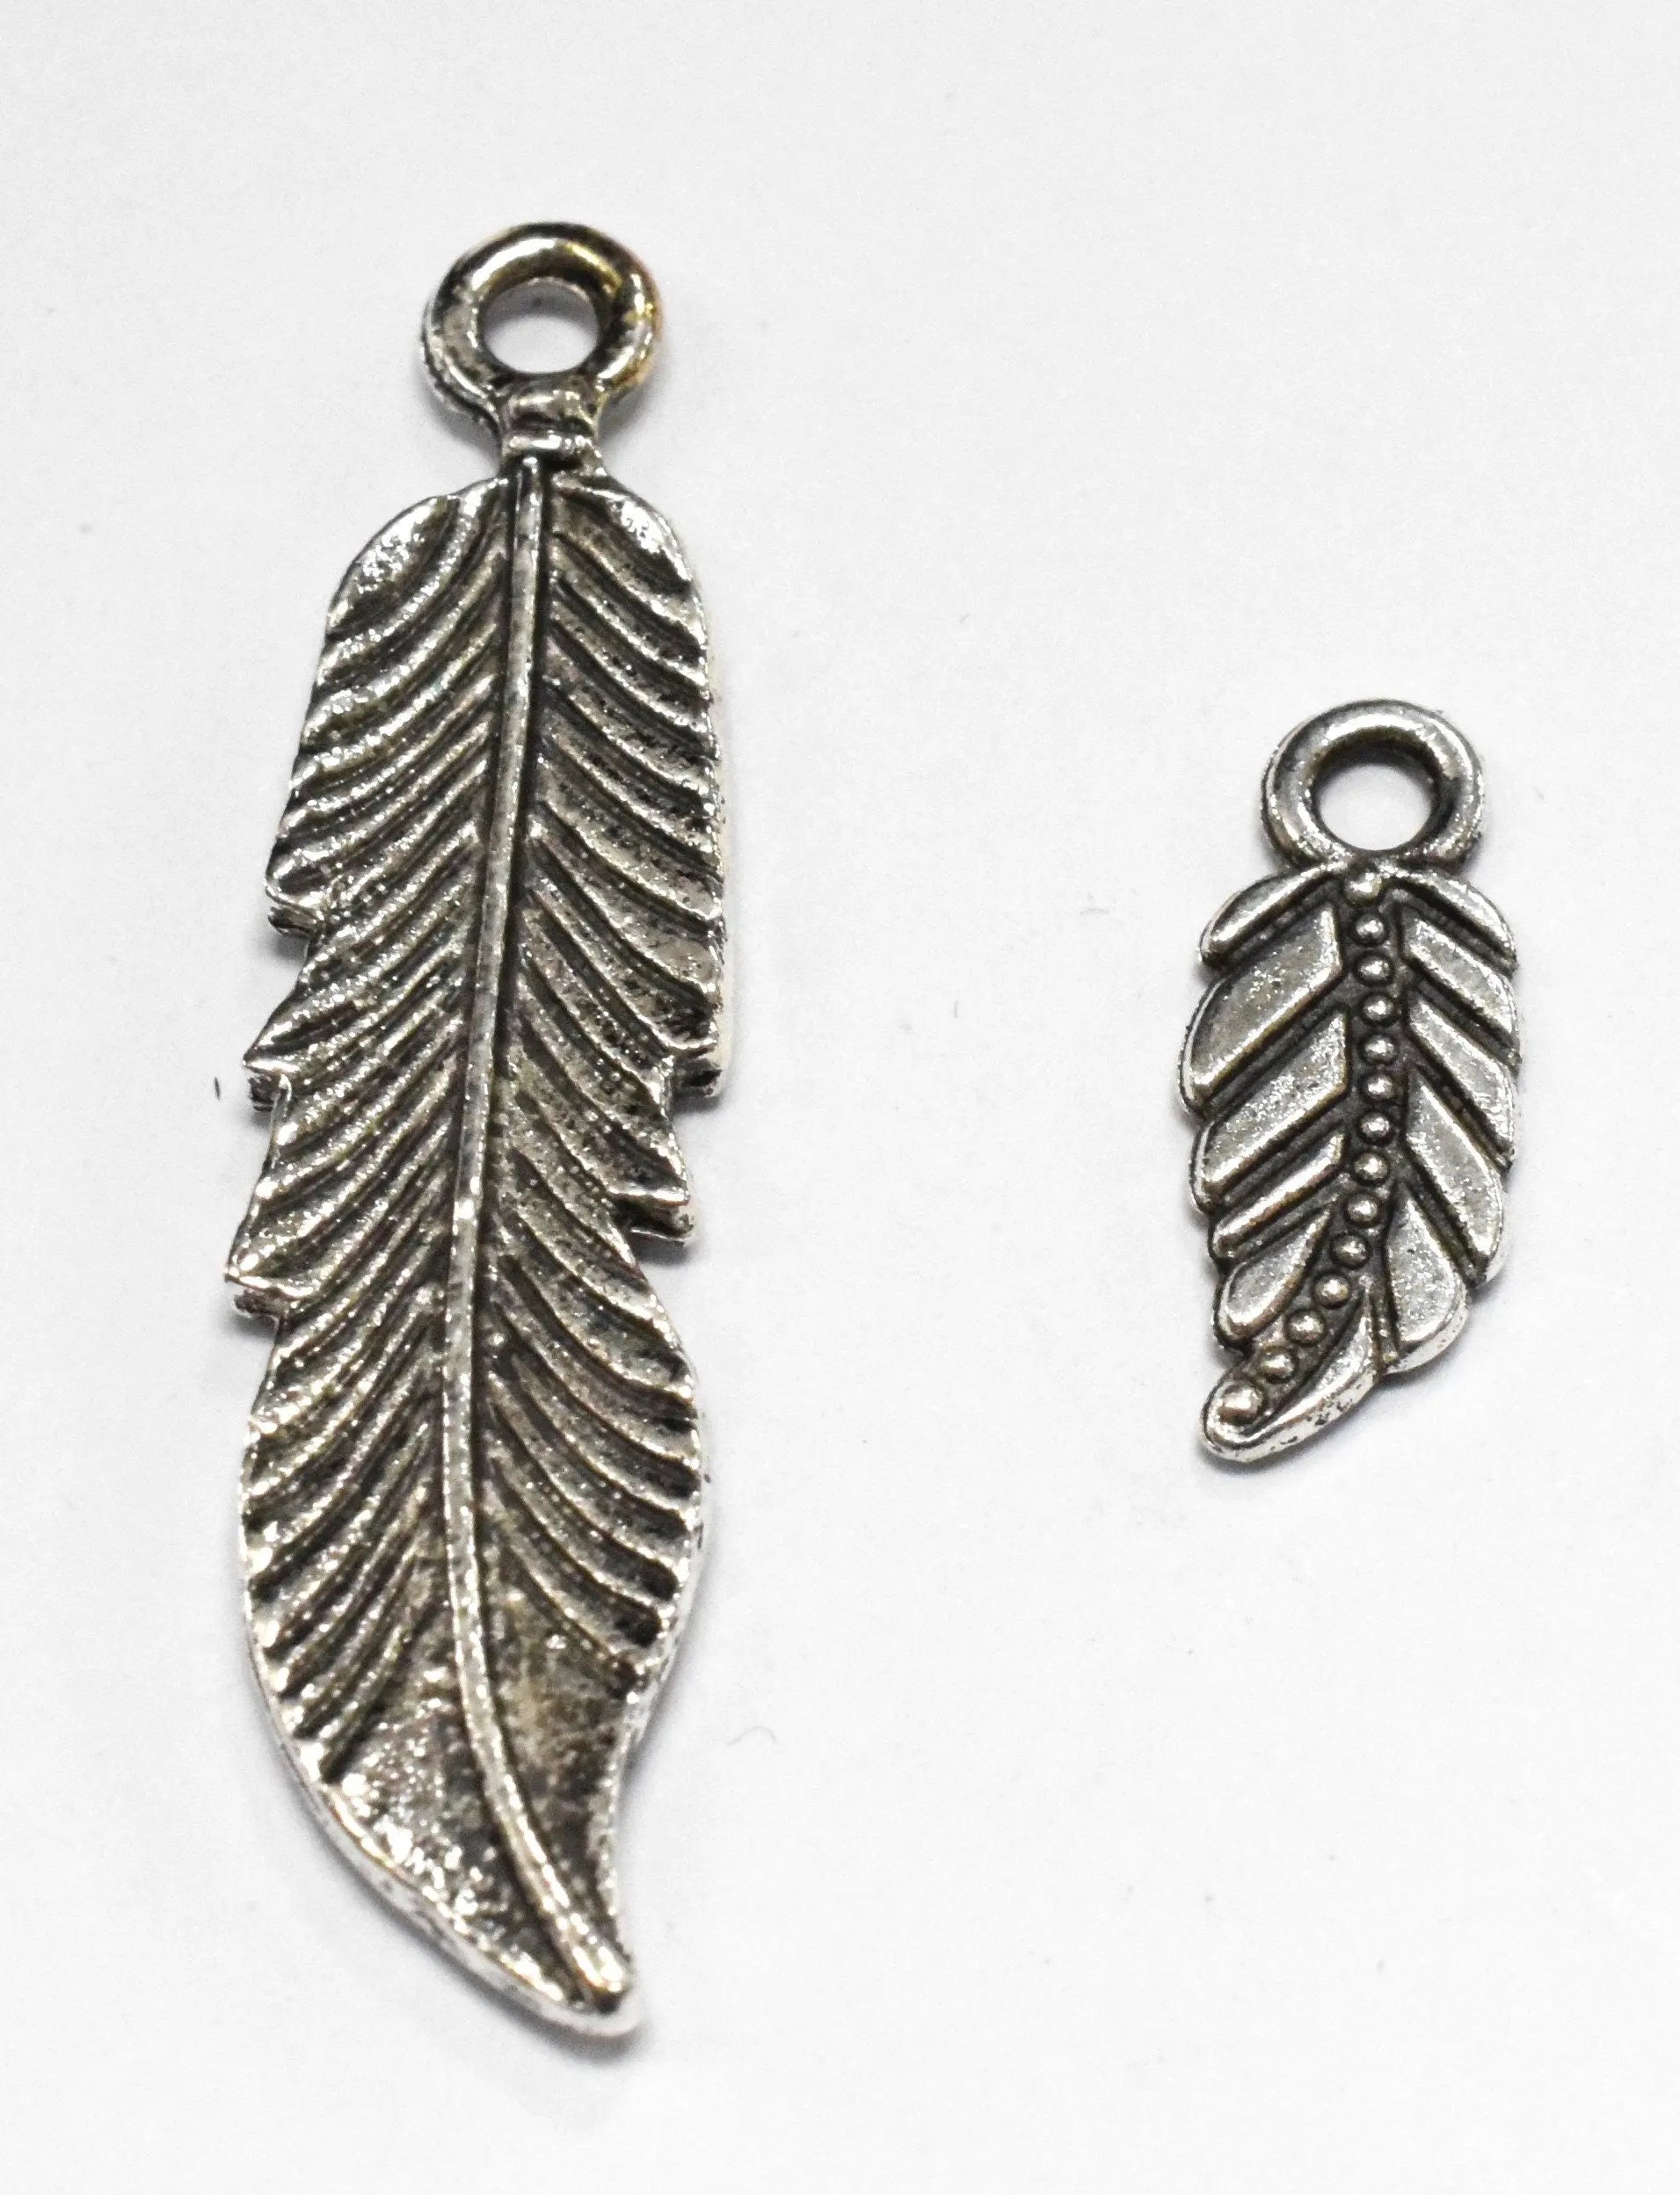 Antique Silver Tropical Textured Leaf Pendant small and big charm 43x10mm/18x7mm Sold by pack Findings for Jewelry making and Wholesale - BeadsFindingDepot